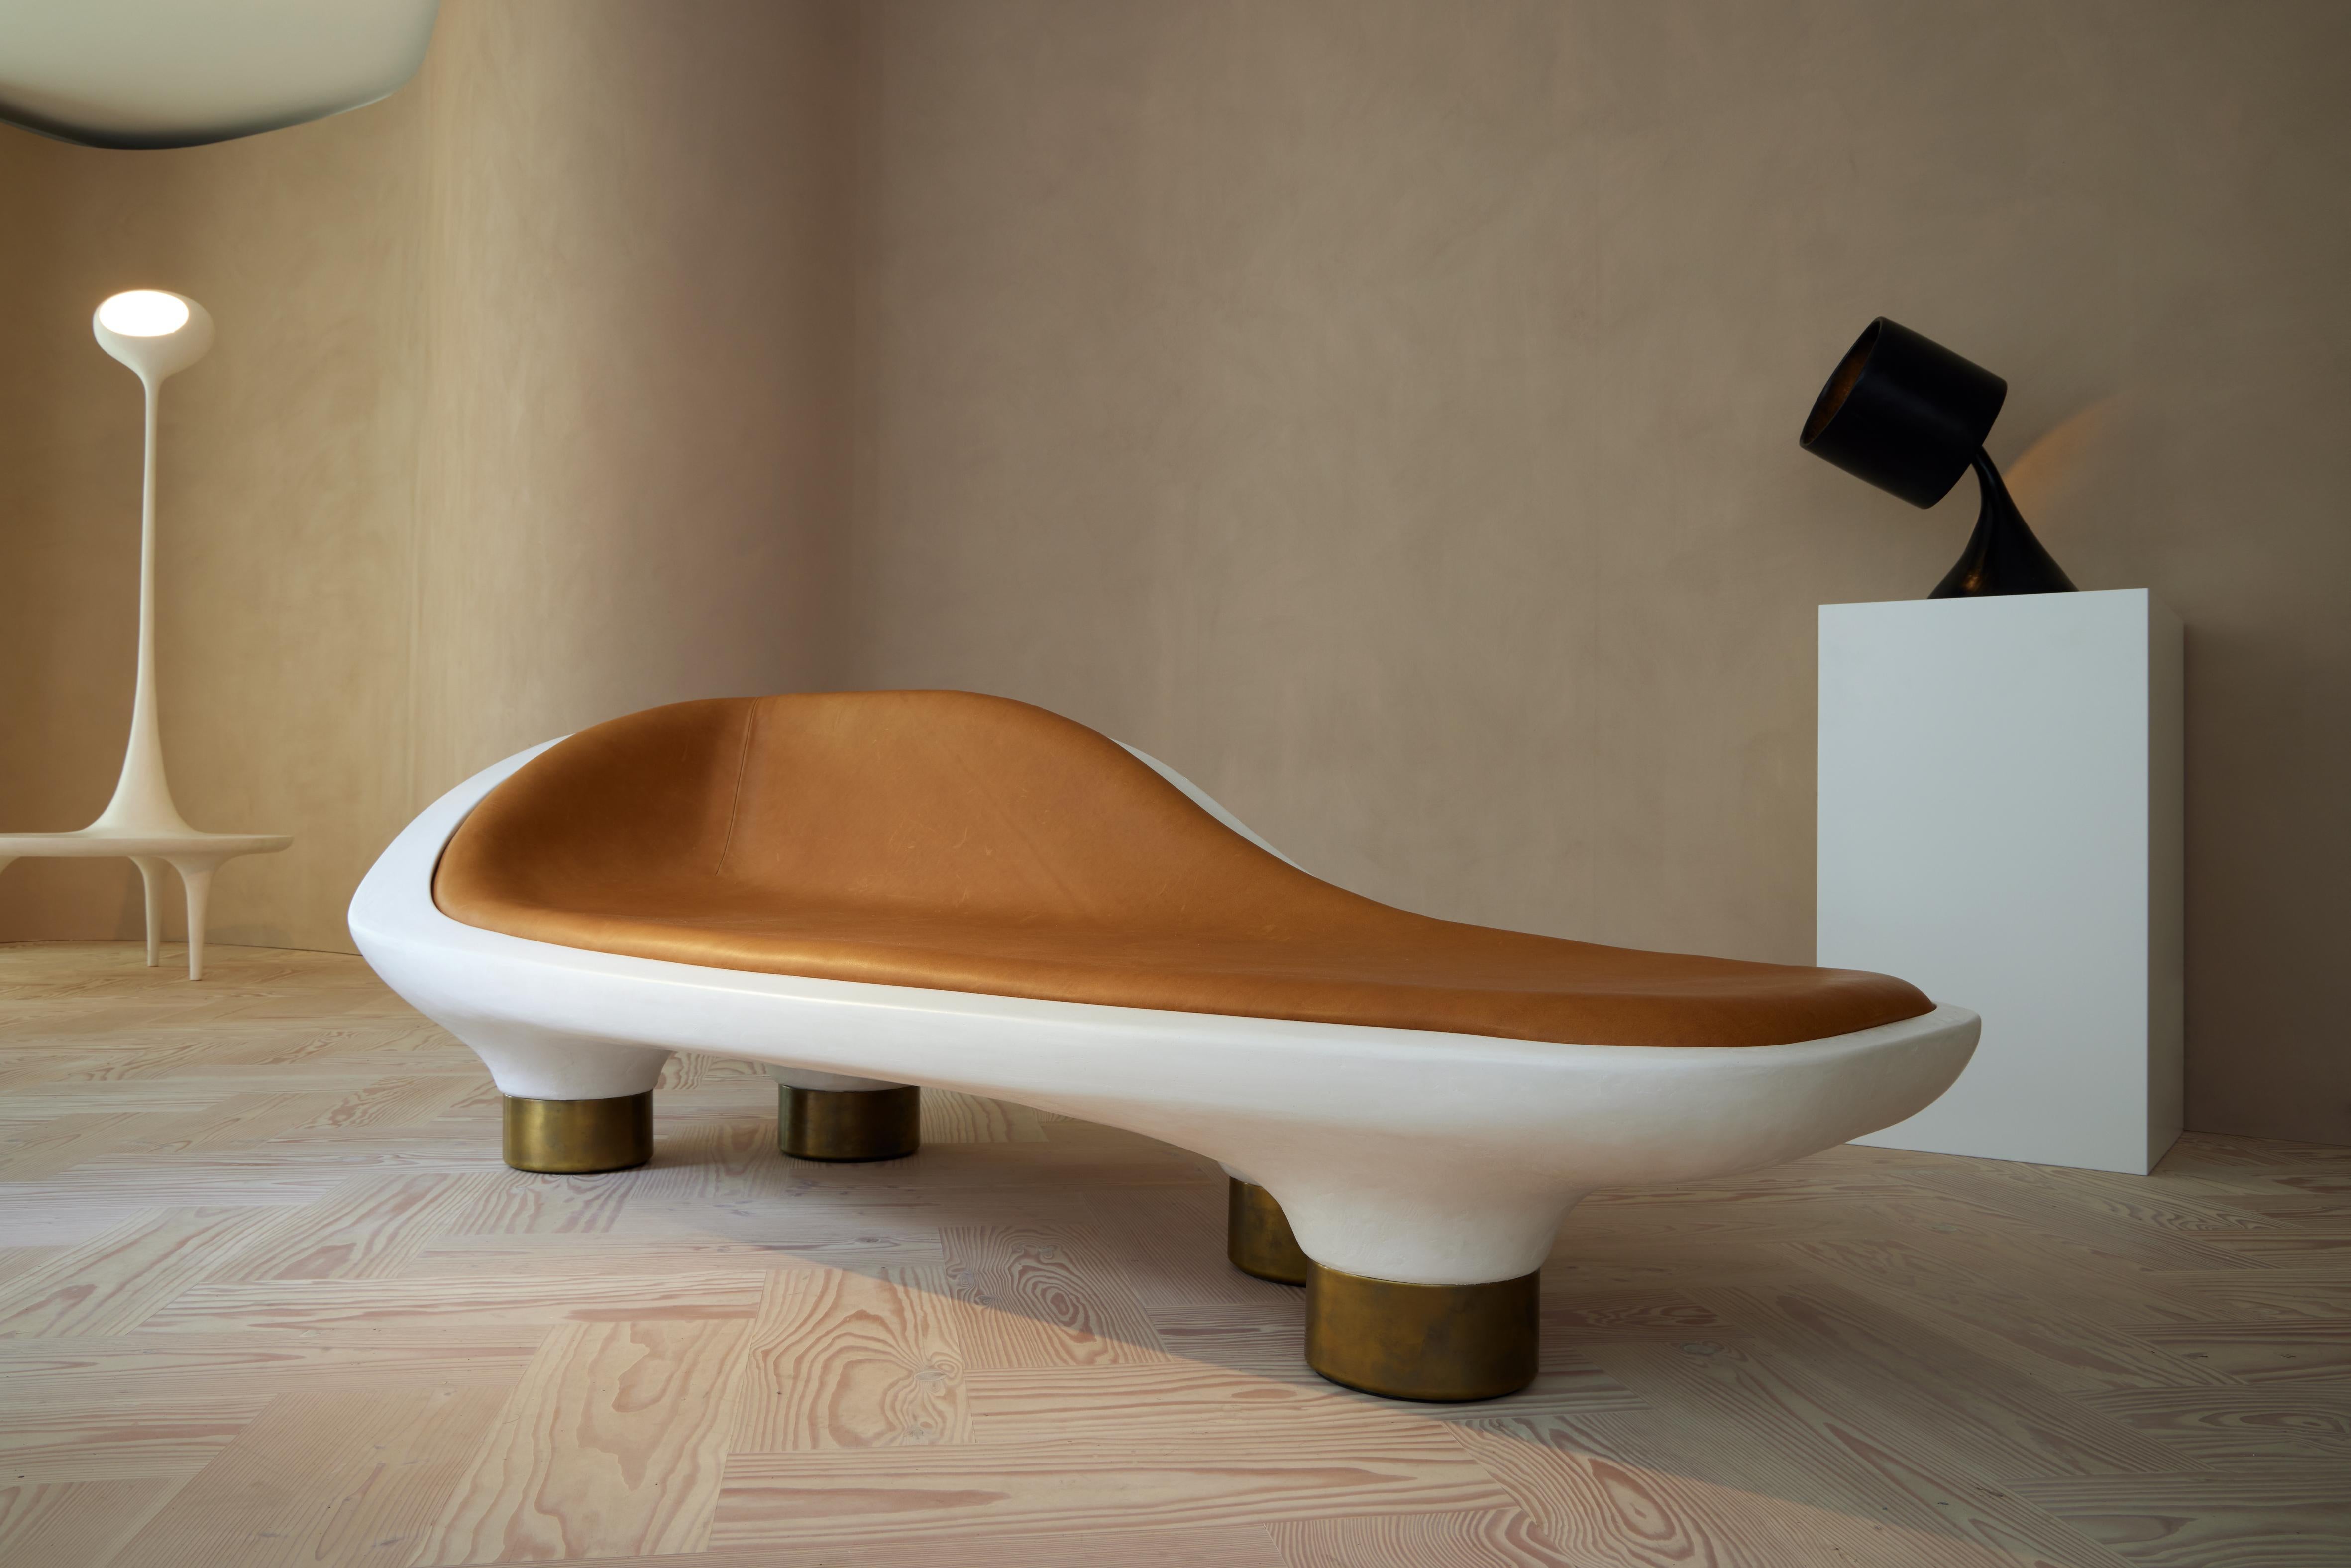 Rodriguez's hand crafted plaster, leather and brass chaise explores his fascination with the French fainting couch. The uniquely specific and contemplative nature of such a piece of furniture, highlights personal engagement focussing on the sole